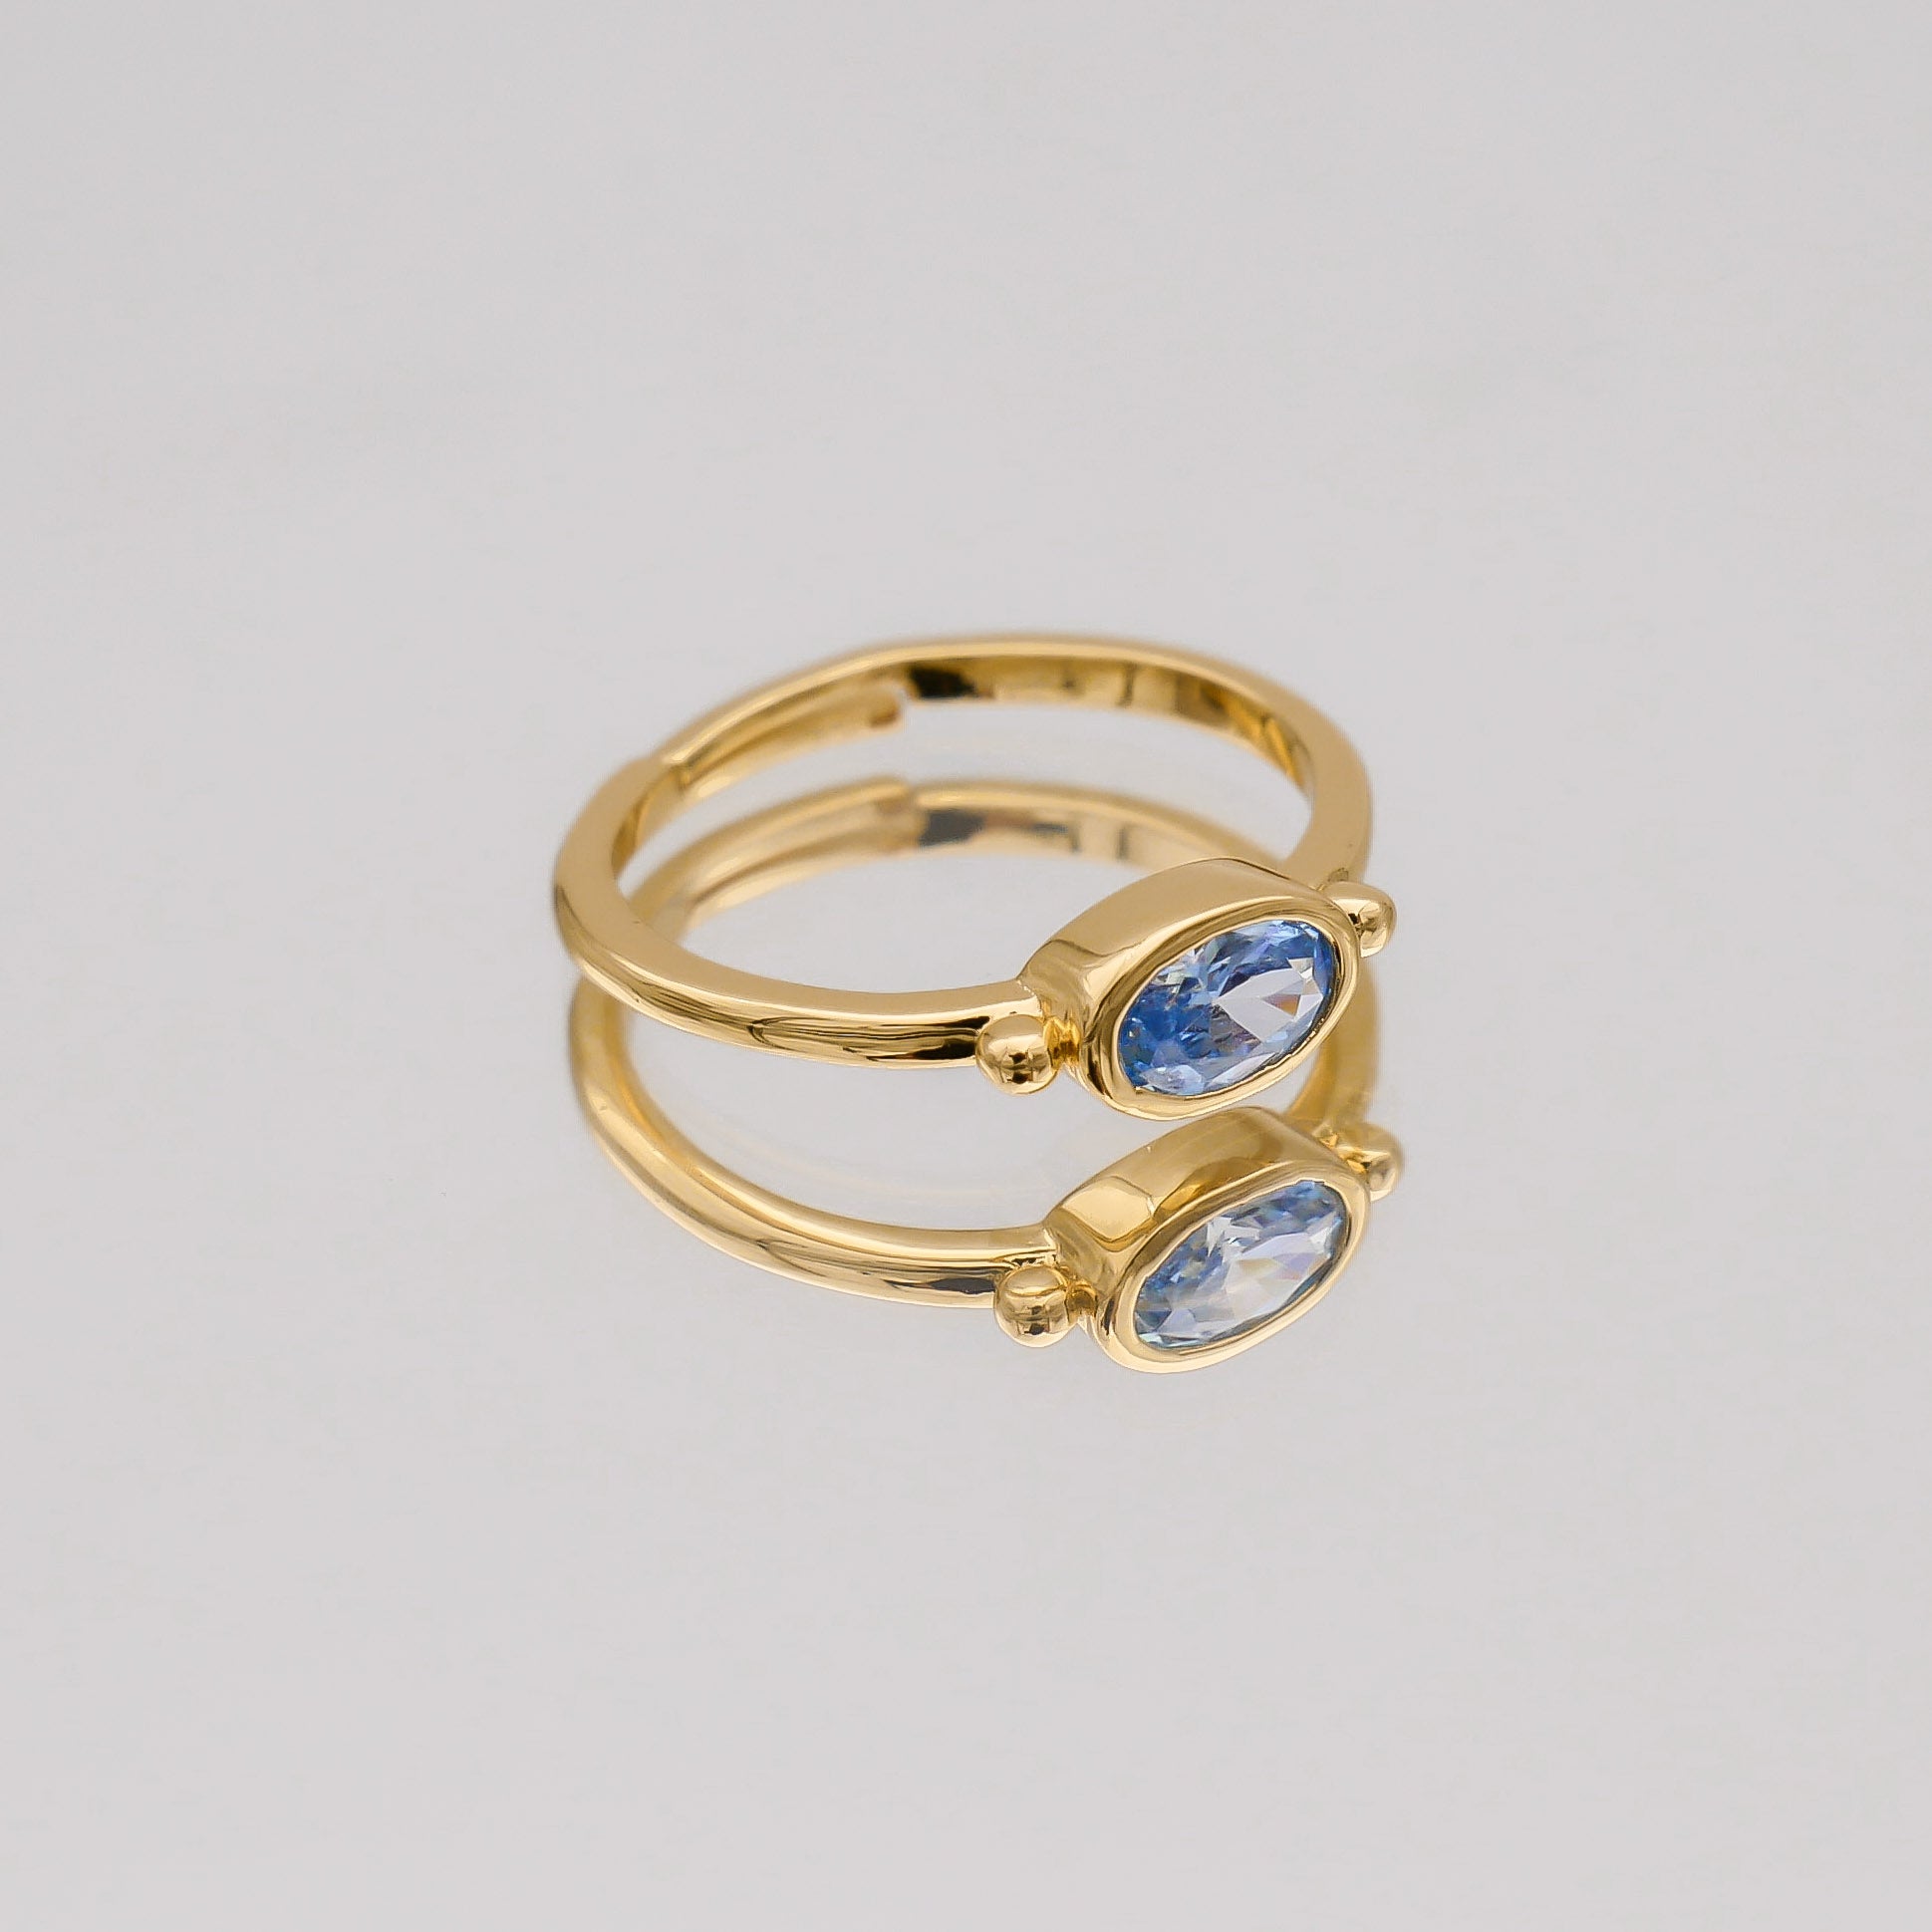 Birthstone ring gold for March